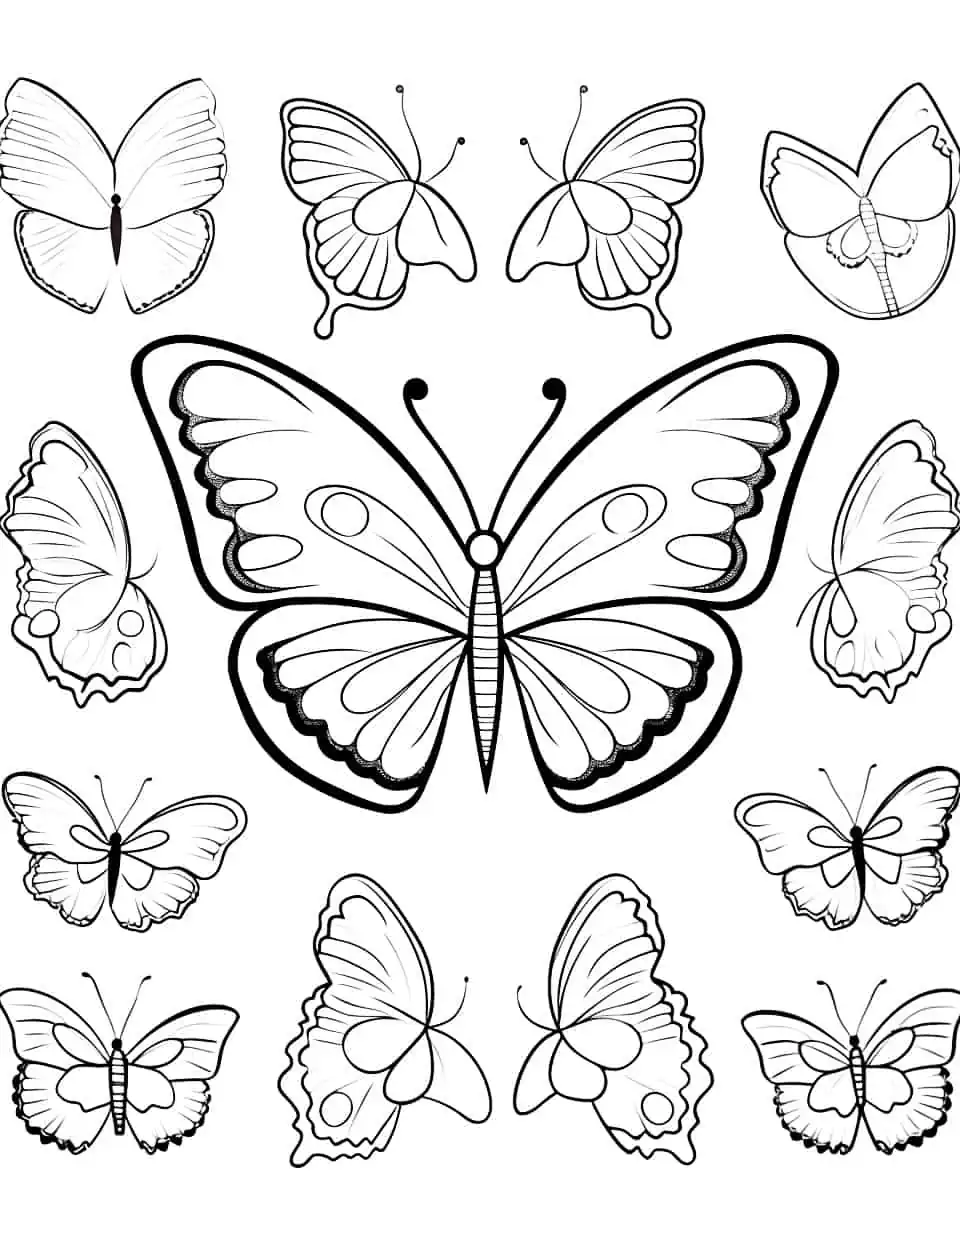 Playful Patterns Butterfly Coloring Page - A coloring page showcasing butterflies with playful patterns and designs.